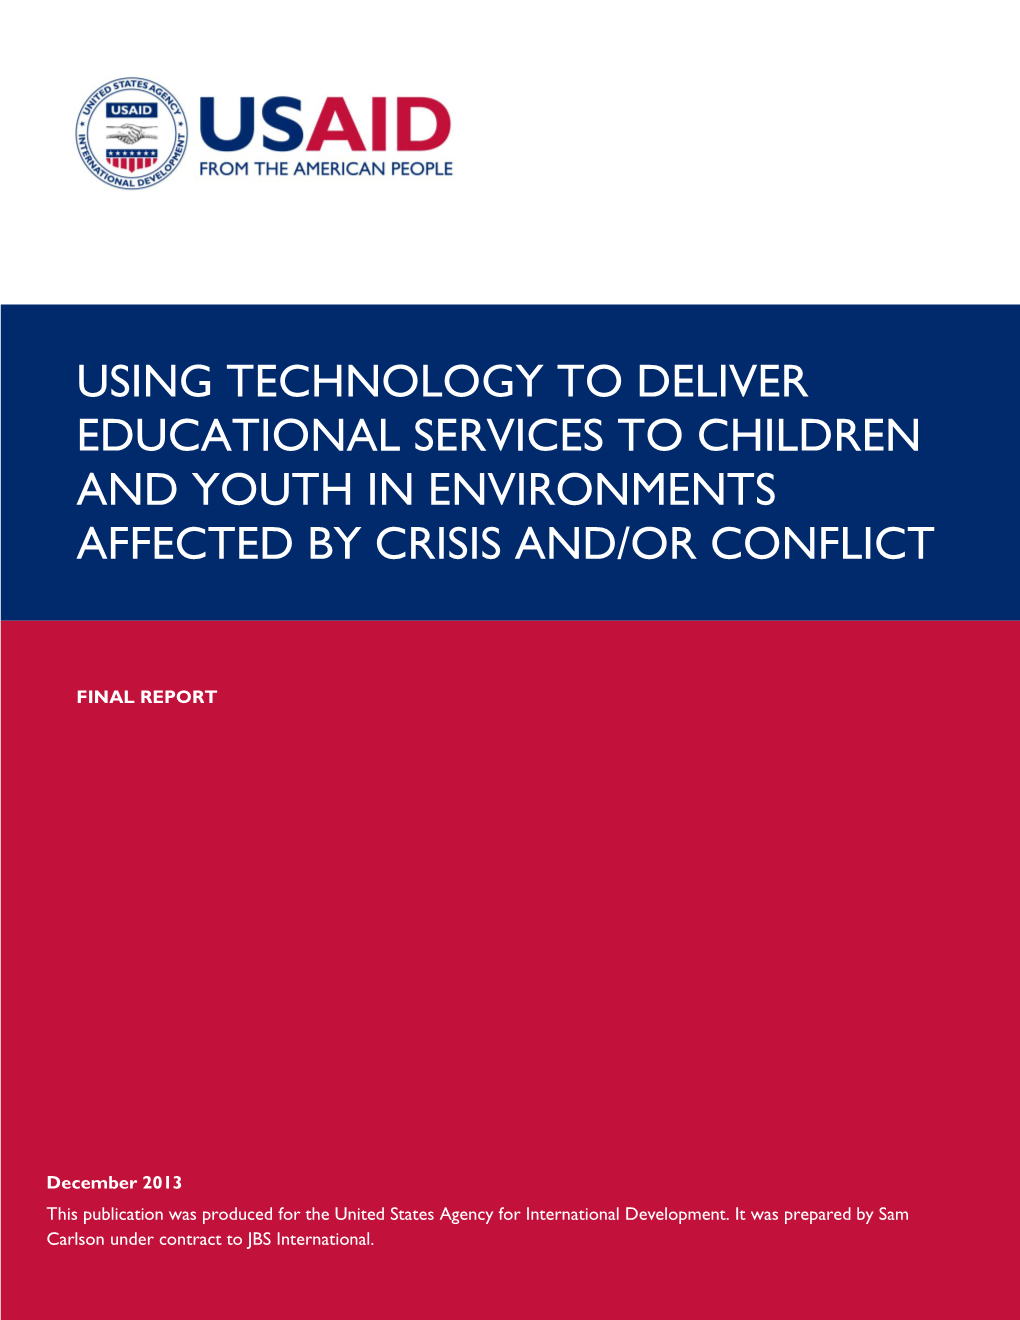 Using Technology to Deliver Educational Services to Children and Youth in Environments Affected by Crisis And/Or Conflict